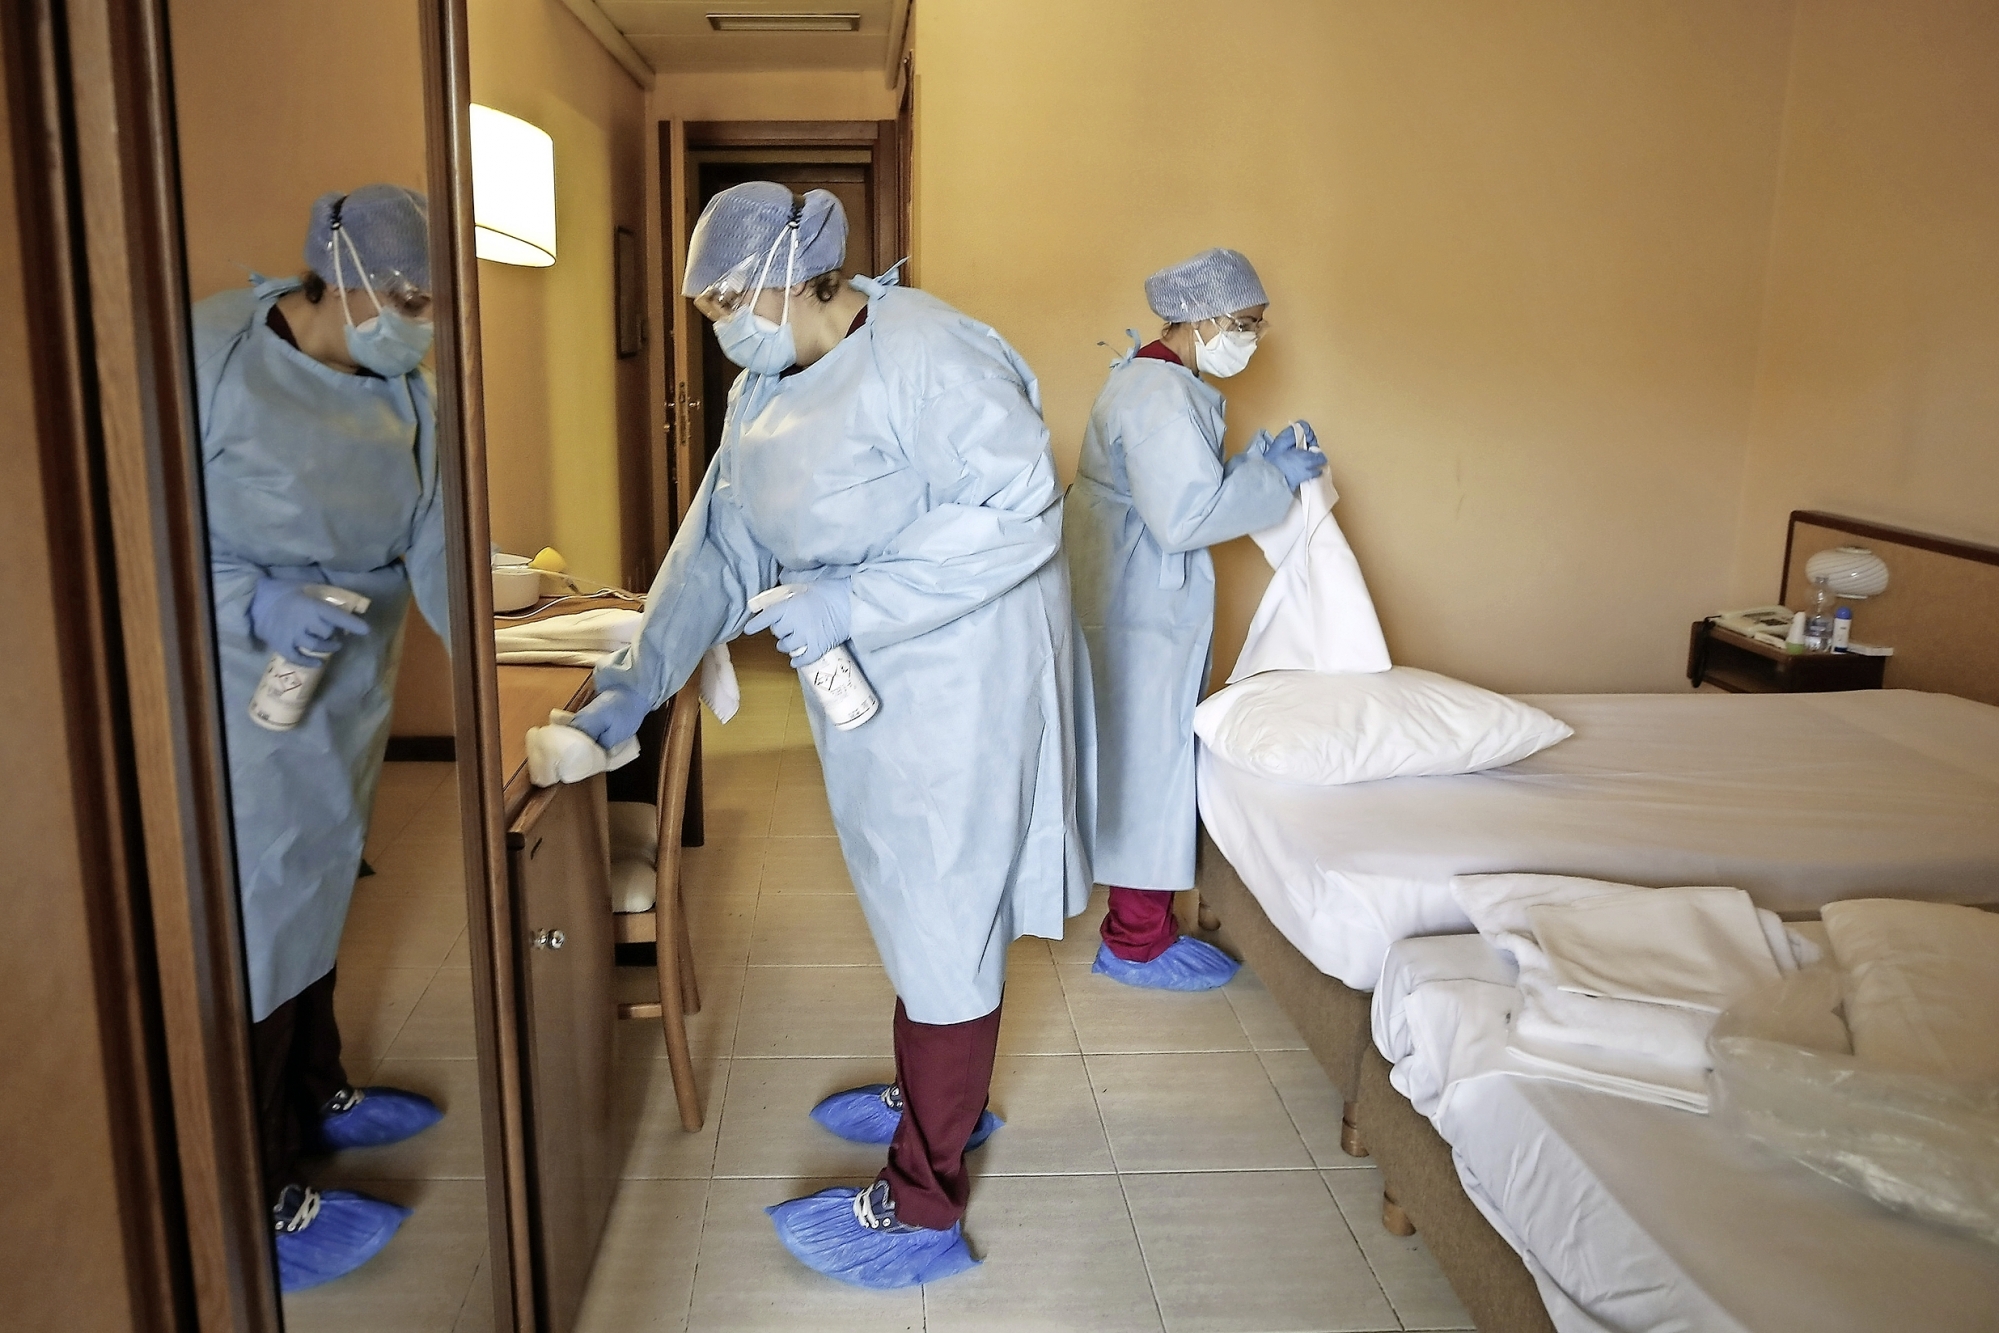 A room of a hotel gets cleaned to welcome patients recovering from COVID-19 who need to undergo quarantine, under the supervision of the Gemelli hospital, in Rome, Saturday, Nov. 14, 2020. (Cecilia Fabiano/LaPresse via AP)